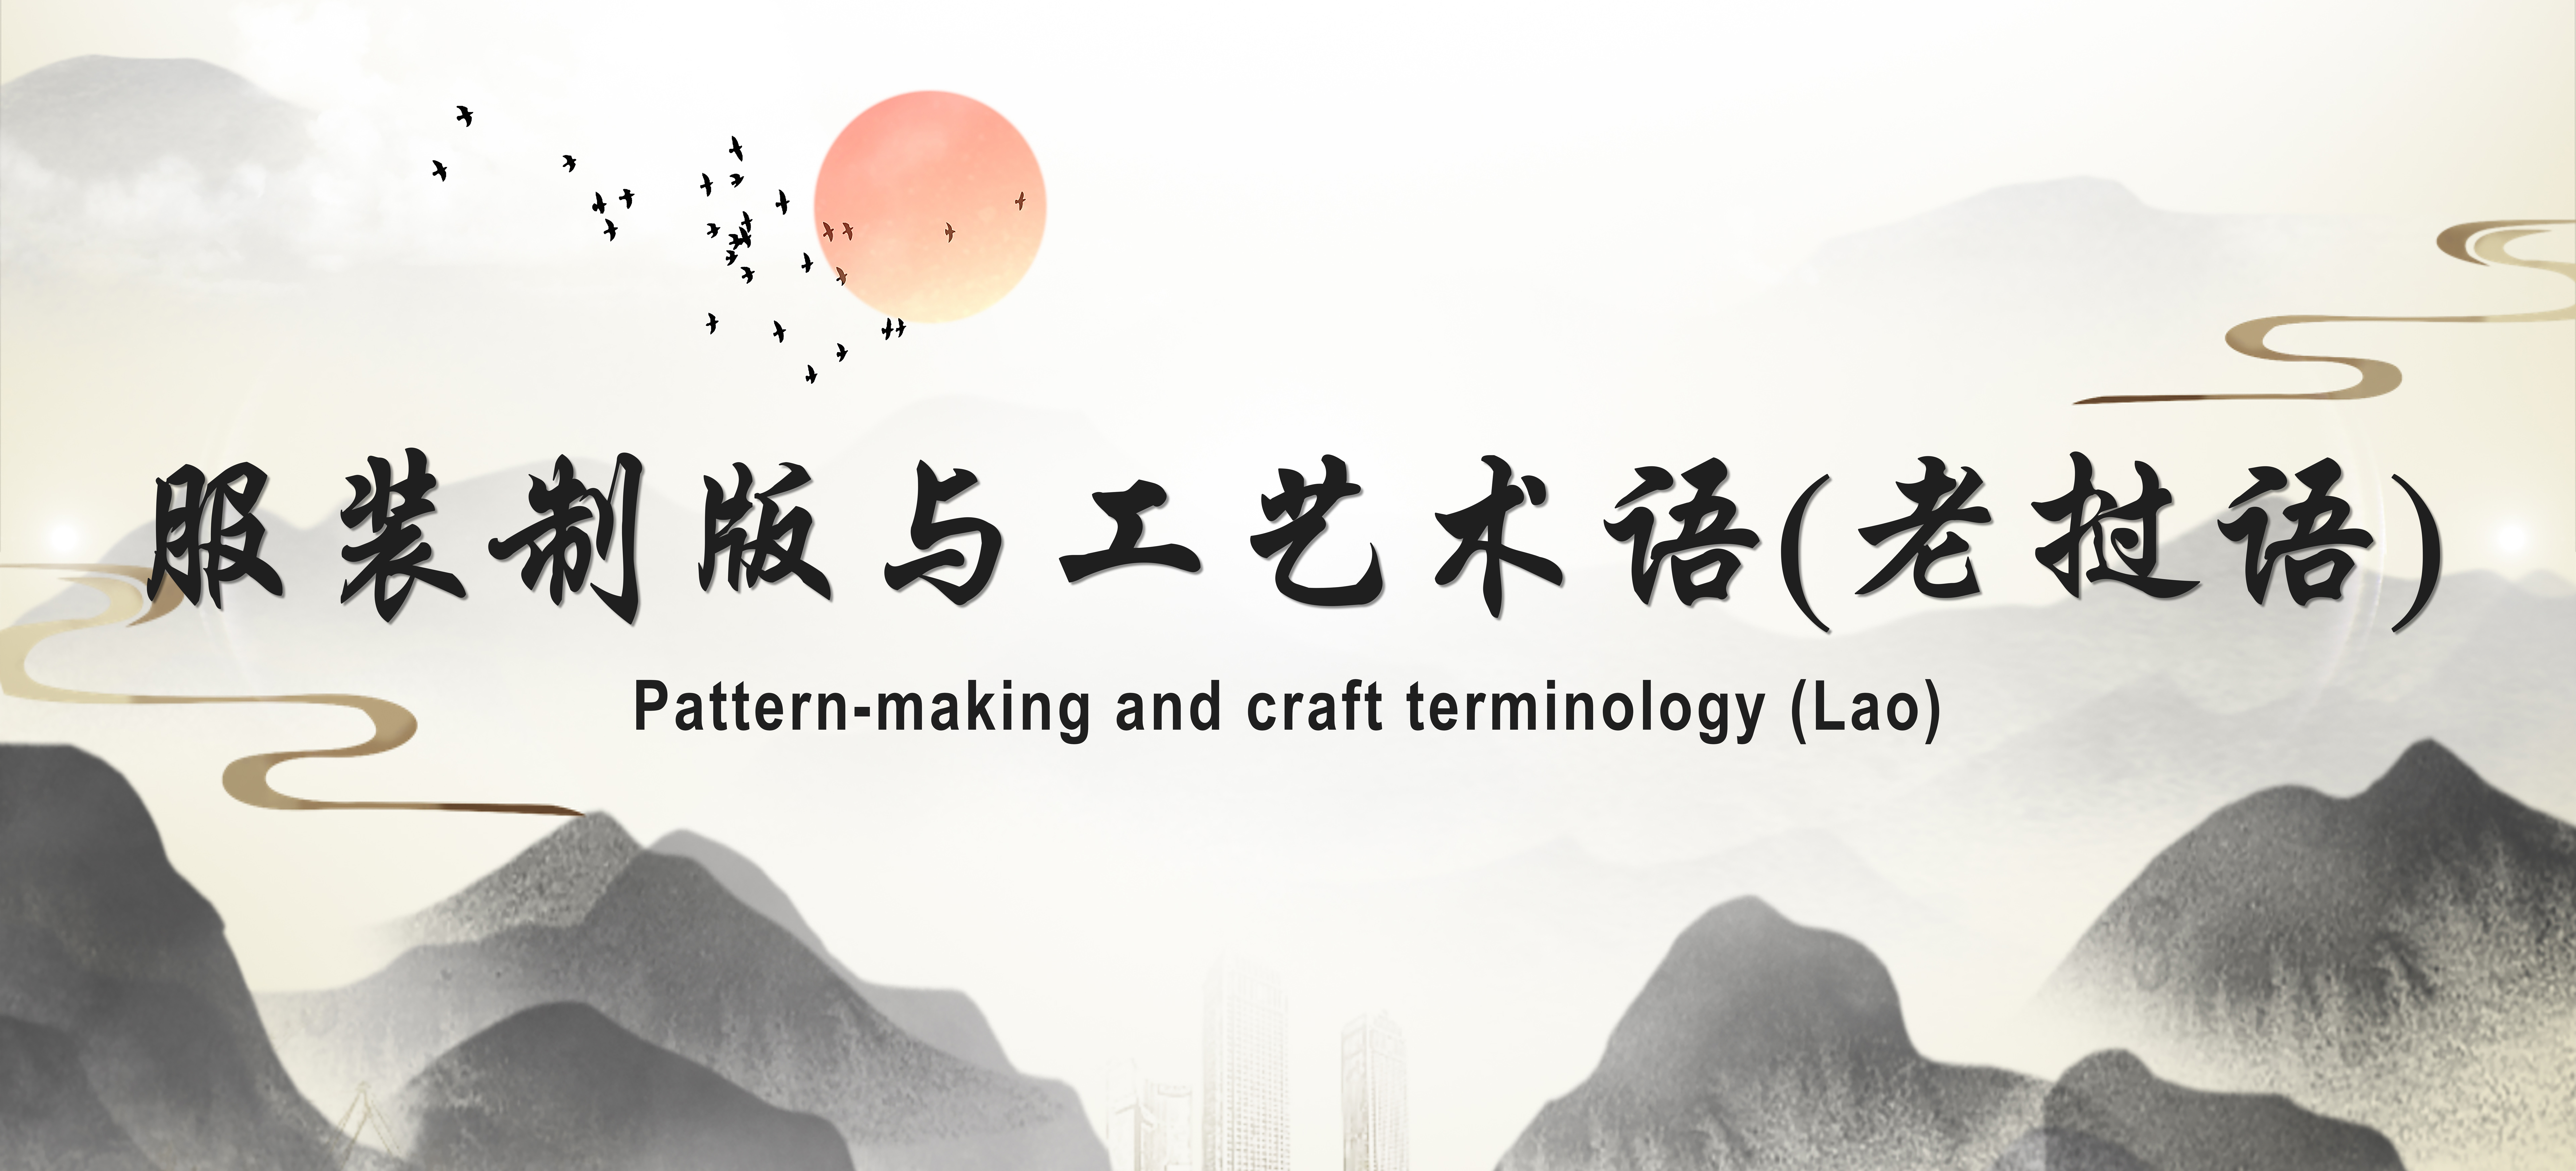 Pattern-making and craft terminology (Lao)